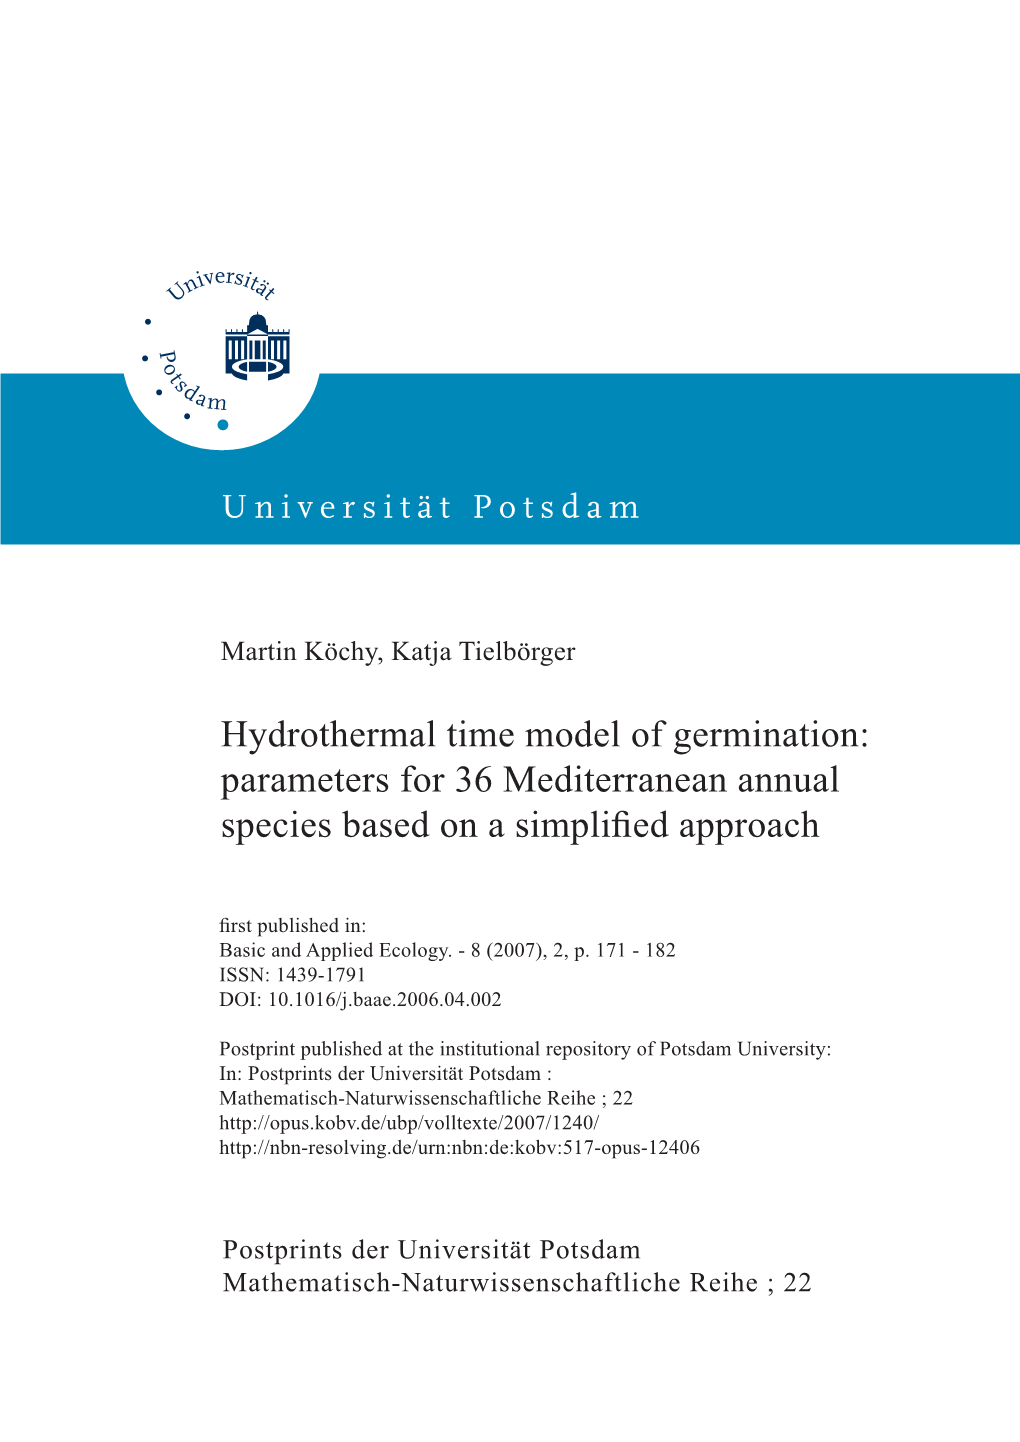 Hydrothermal Time Model of Germination: Parameters for 36 Mediterranean Annual Species Based on a Simpliﬁ Ed Approach